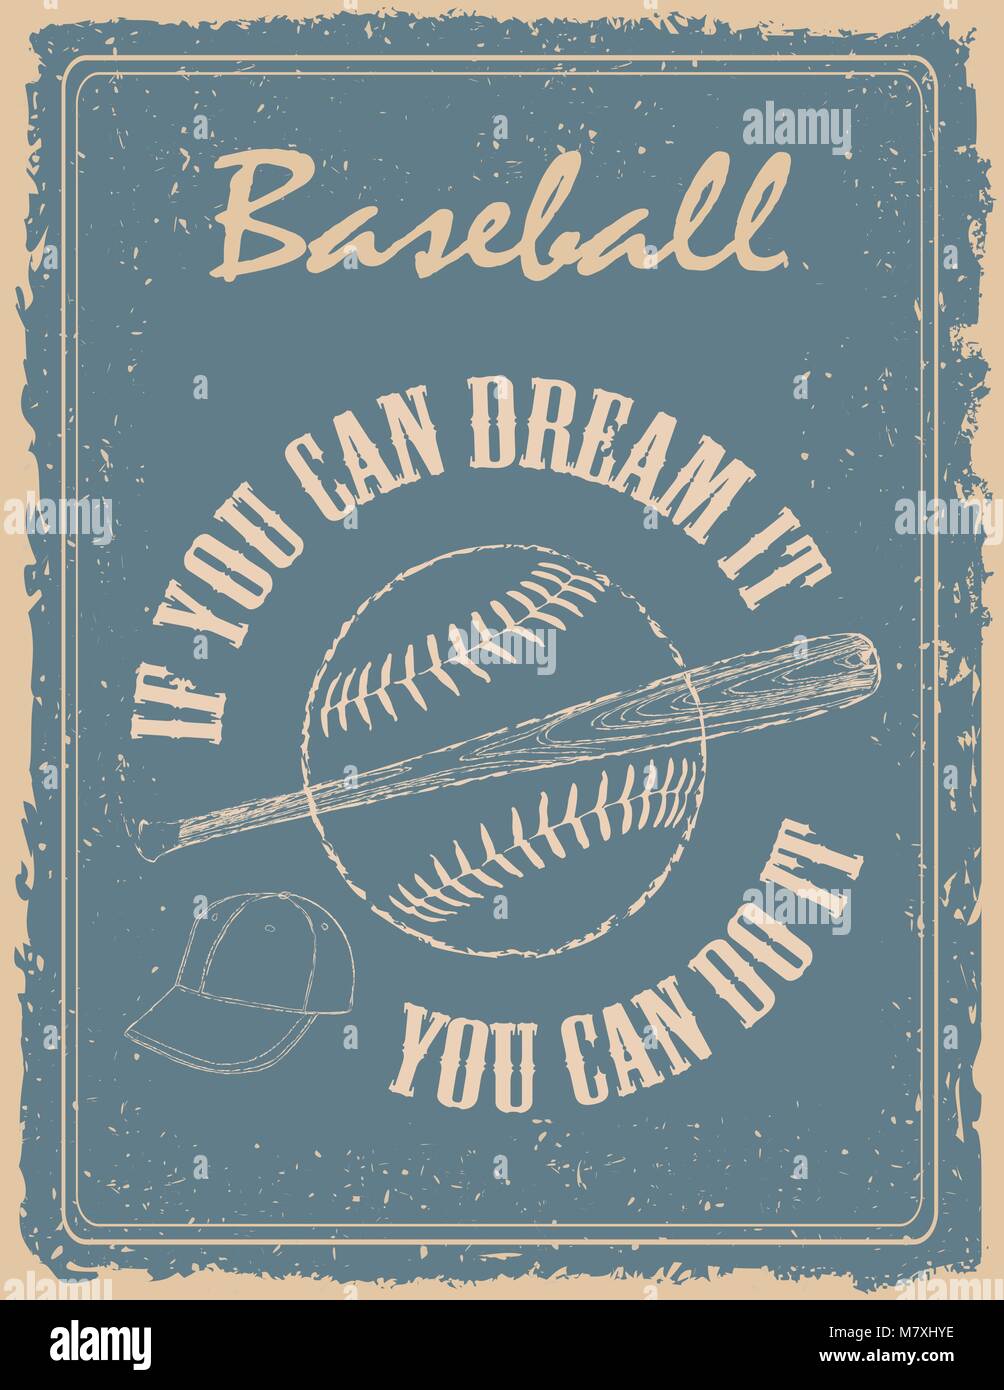 Vintage baseball poster on old paper background  with motivation quote by Walt Disney Stock Vector